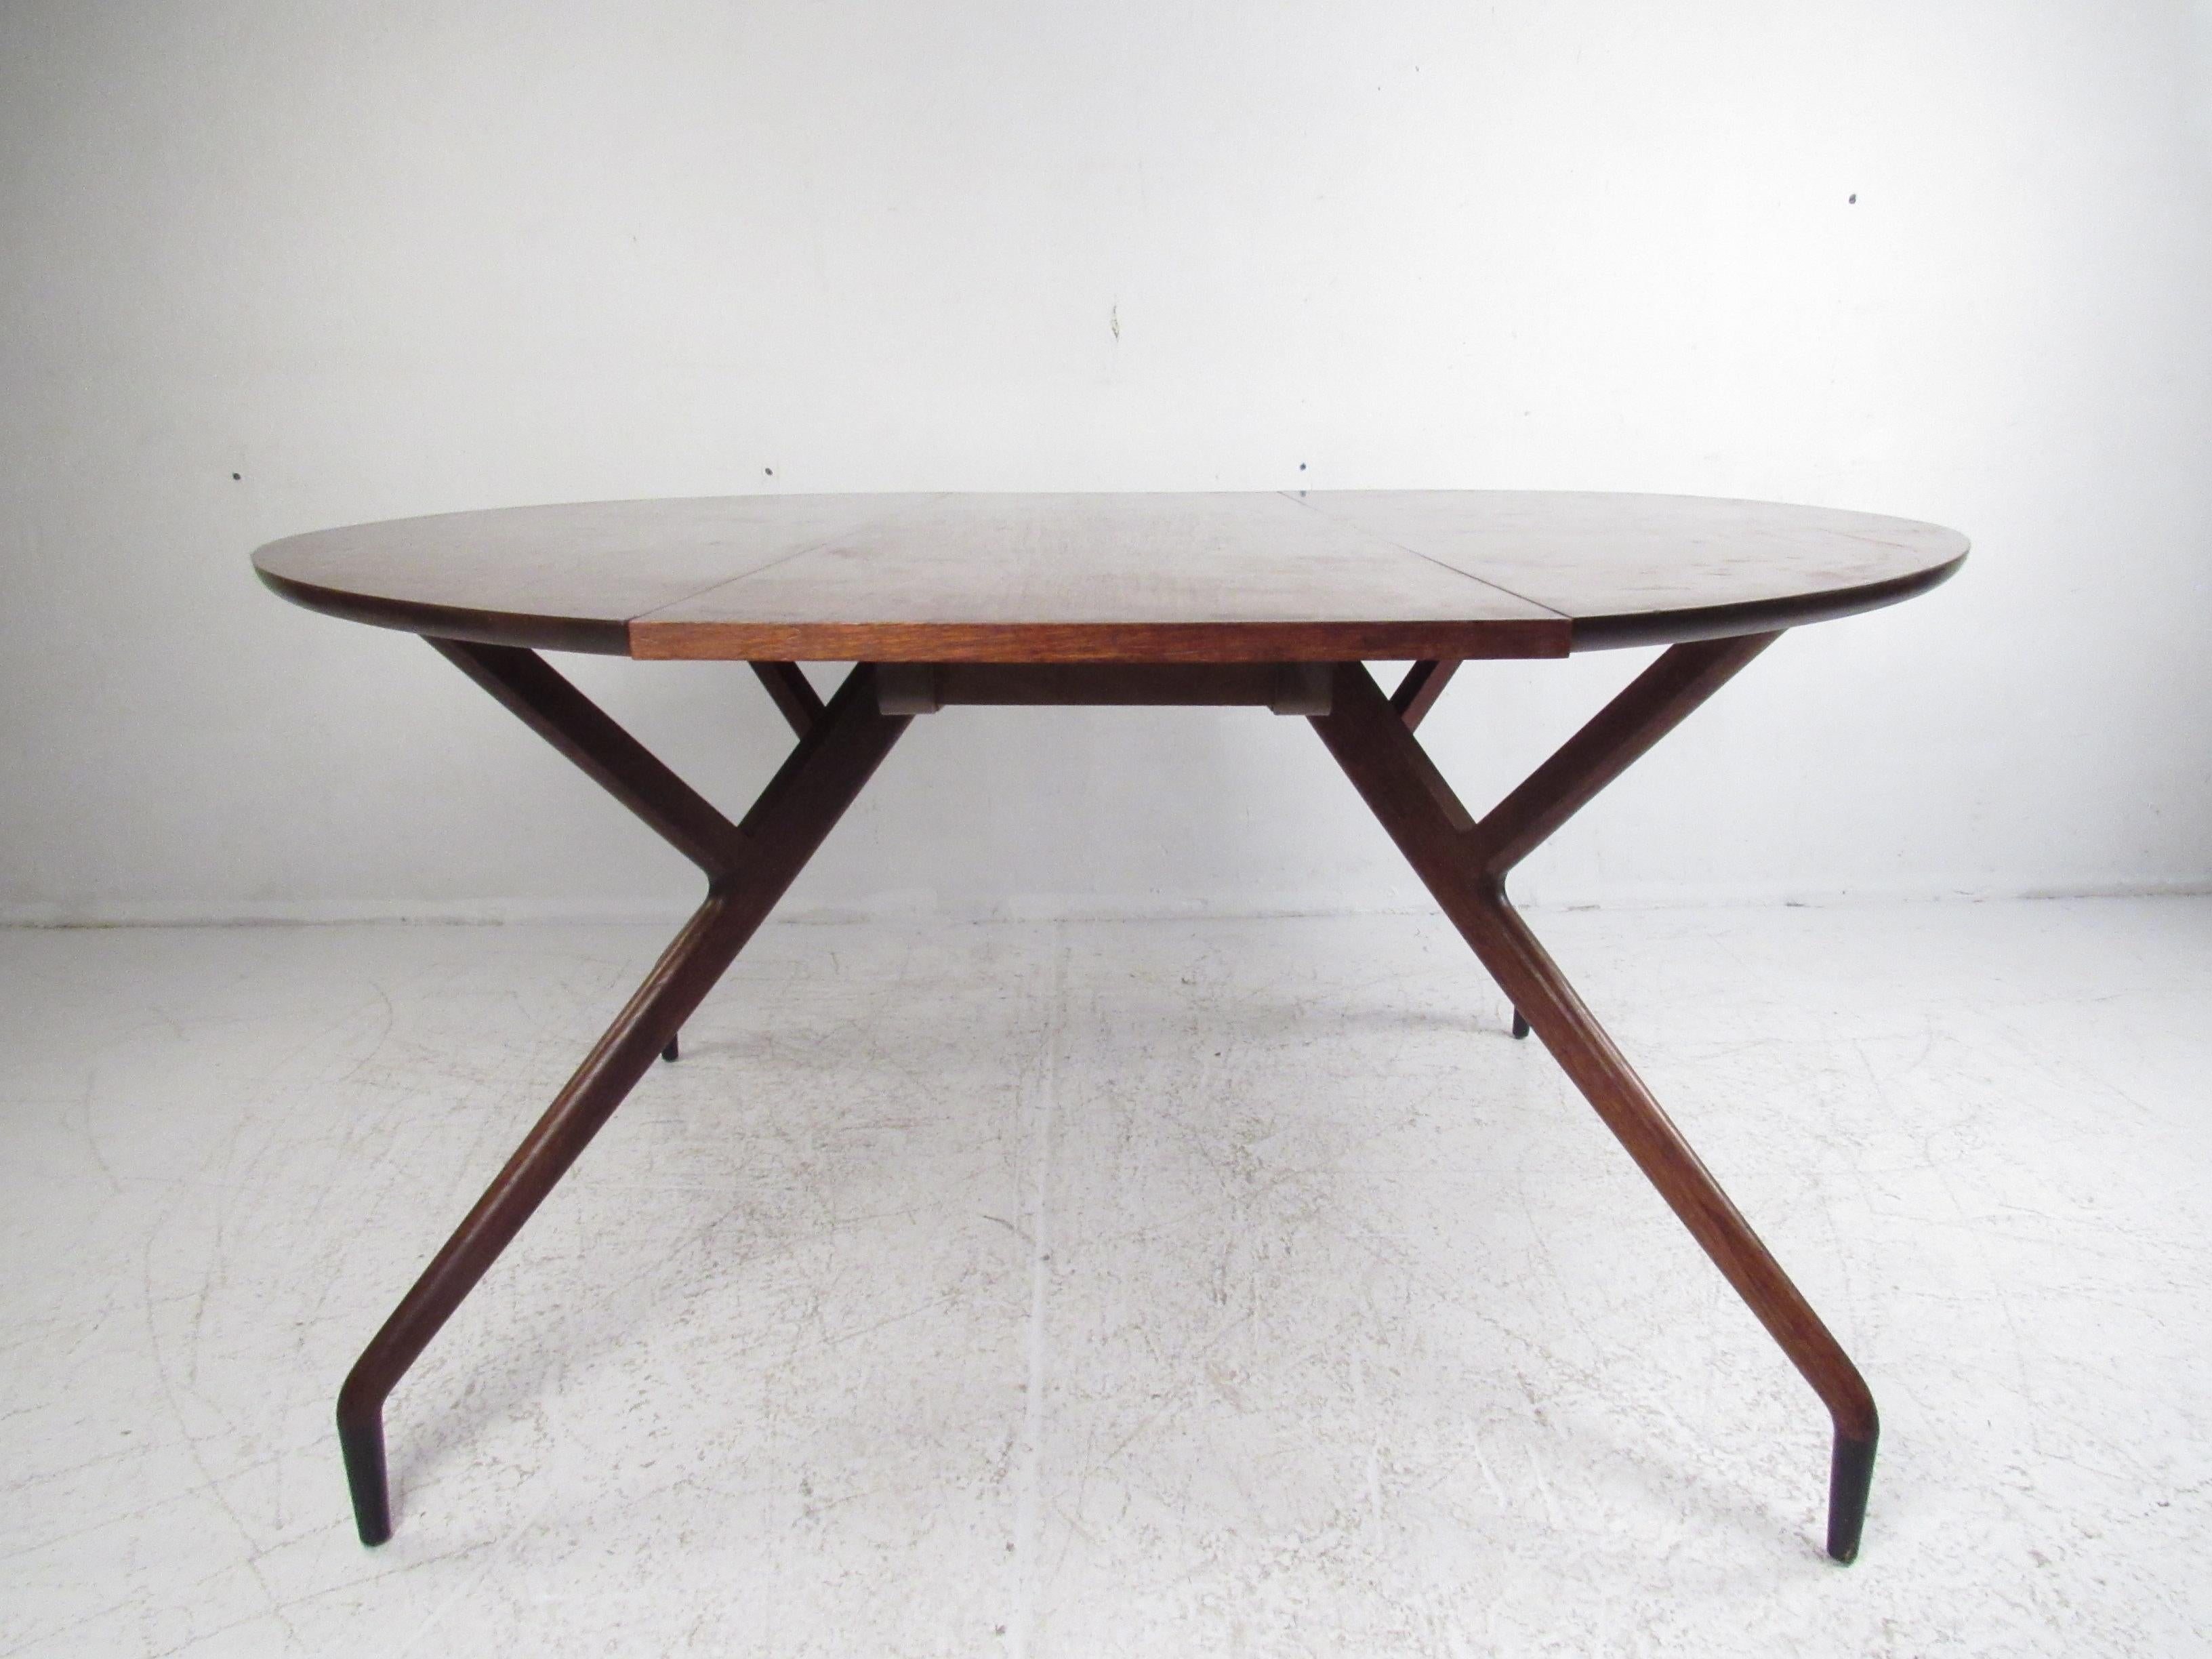 This beautiful vintage modern dining table features a convenient drop leaf design that allows the table to expand to 54 inches wide. Sturdy construction with a large table top that easily caters to many guests. The unusual spider legged base and